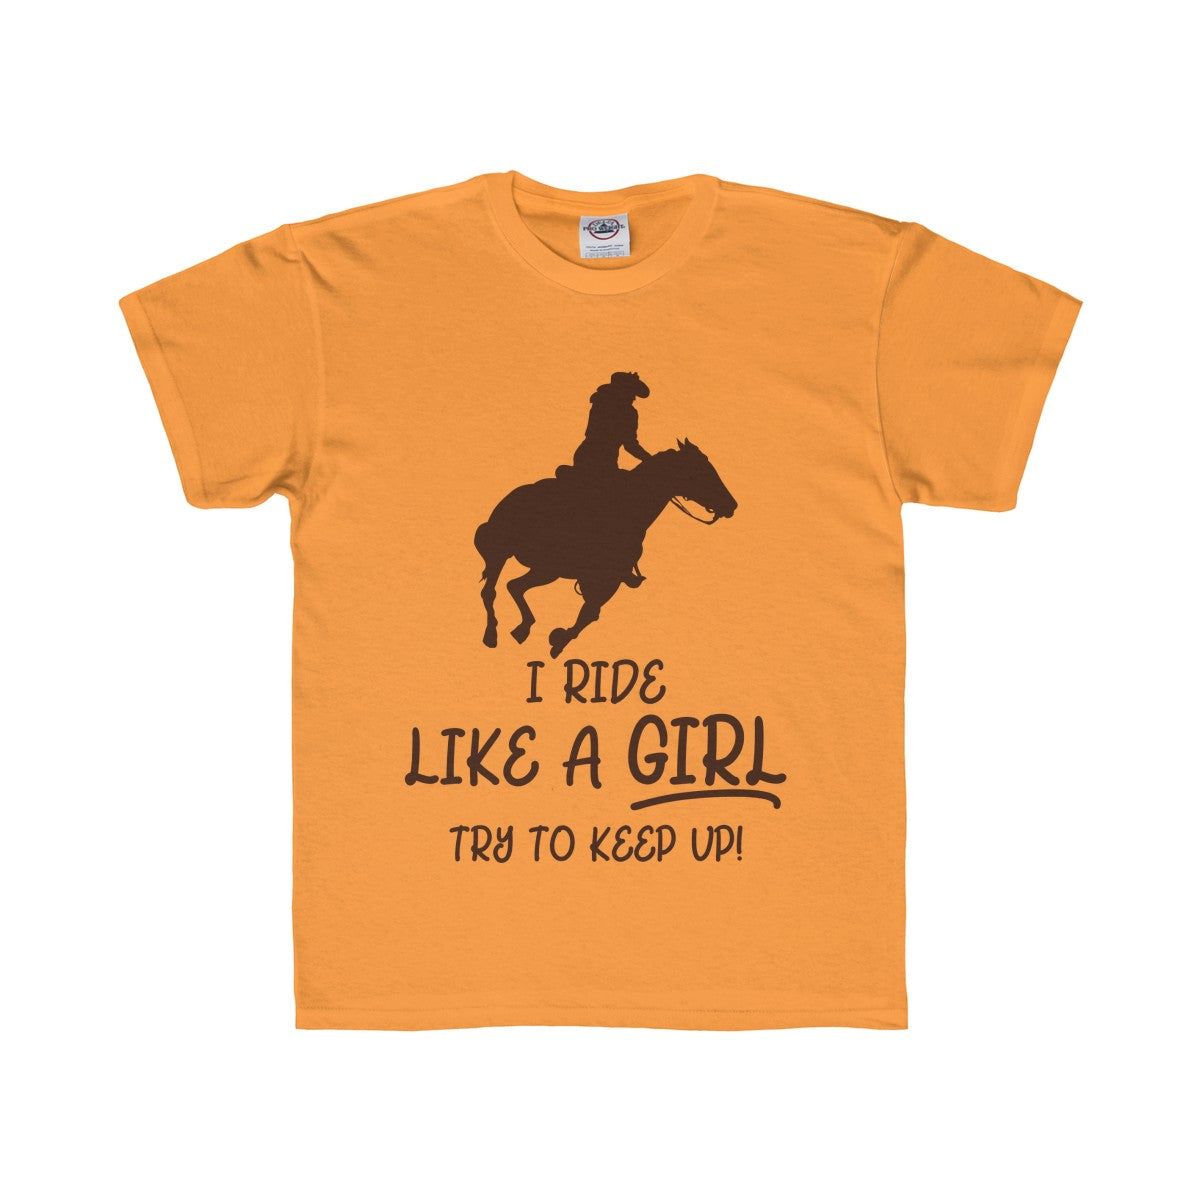 I Ride Like a Girl Try to Keep Up Kids Regular Fit Tee-Kids clothes-PureDesignTees